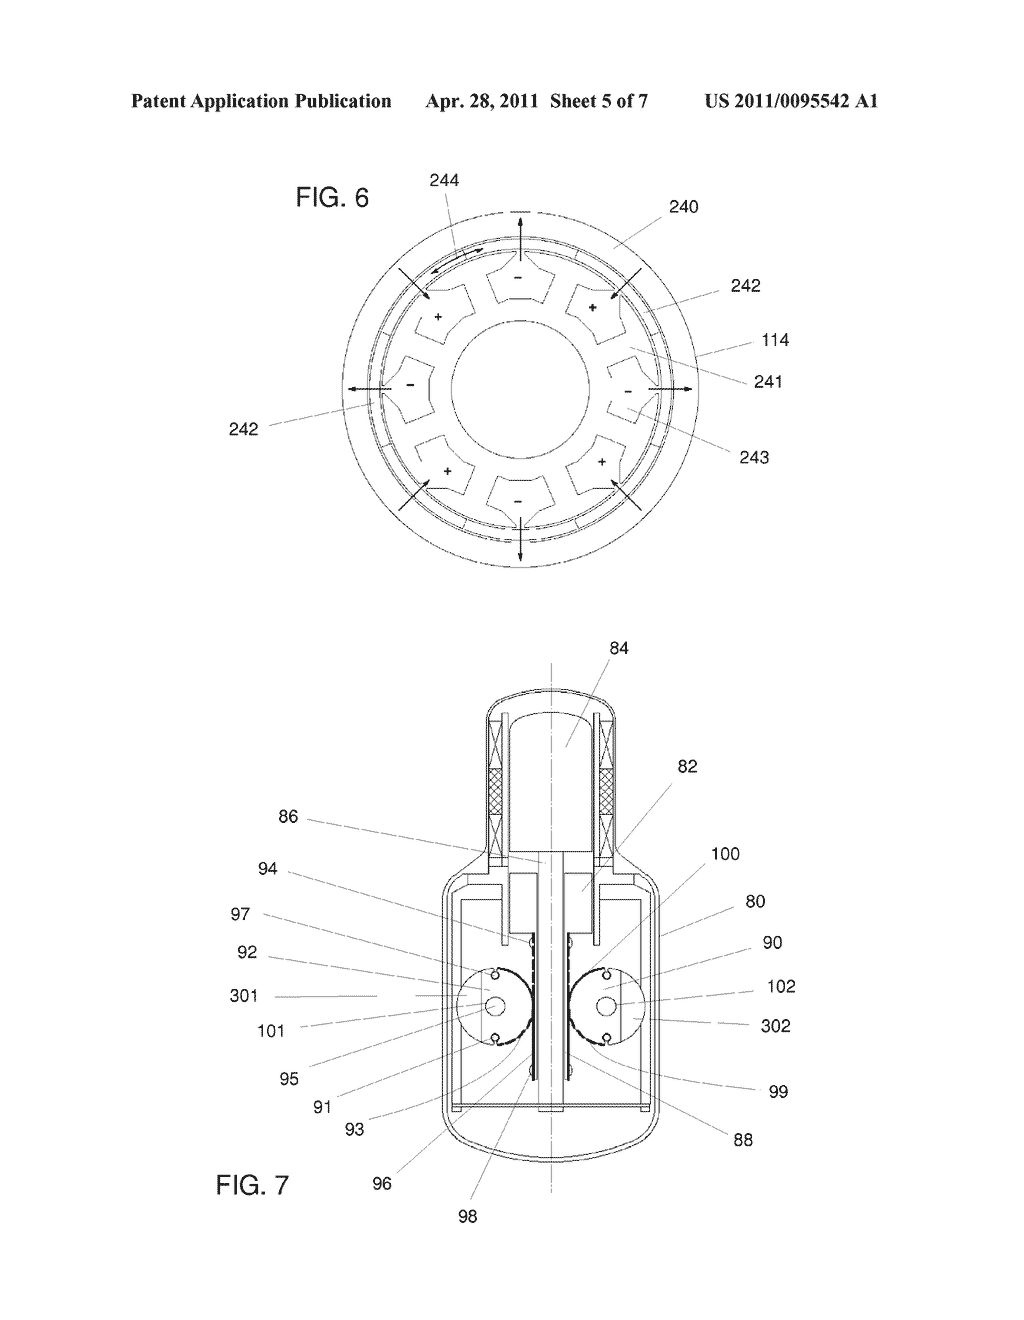 LUBRICANT FREE, REDUCED MASS, FREE-PISTON, STIRLING MACHINE HAVING RECIPROCATING PISTON DRIVINGLY LINKED TO ROTARY ELECTROMAGNETIC TRANSDUCER MOVING IN ROTATIONAL OSCILLATION - diagram, schematic, and image 06